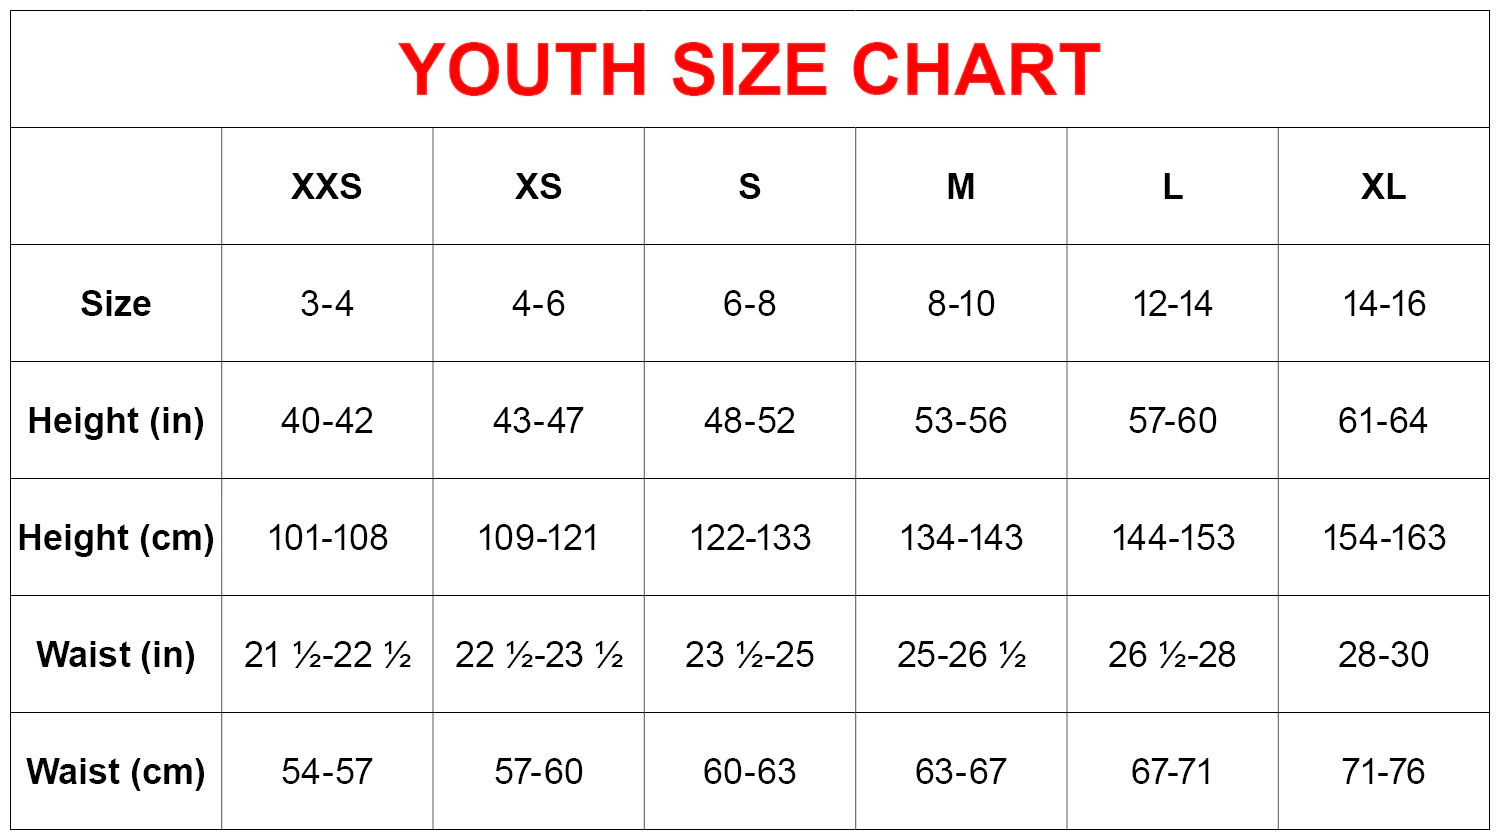 Hot Chilly's Kids' Size Chart